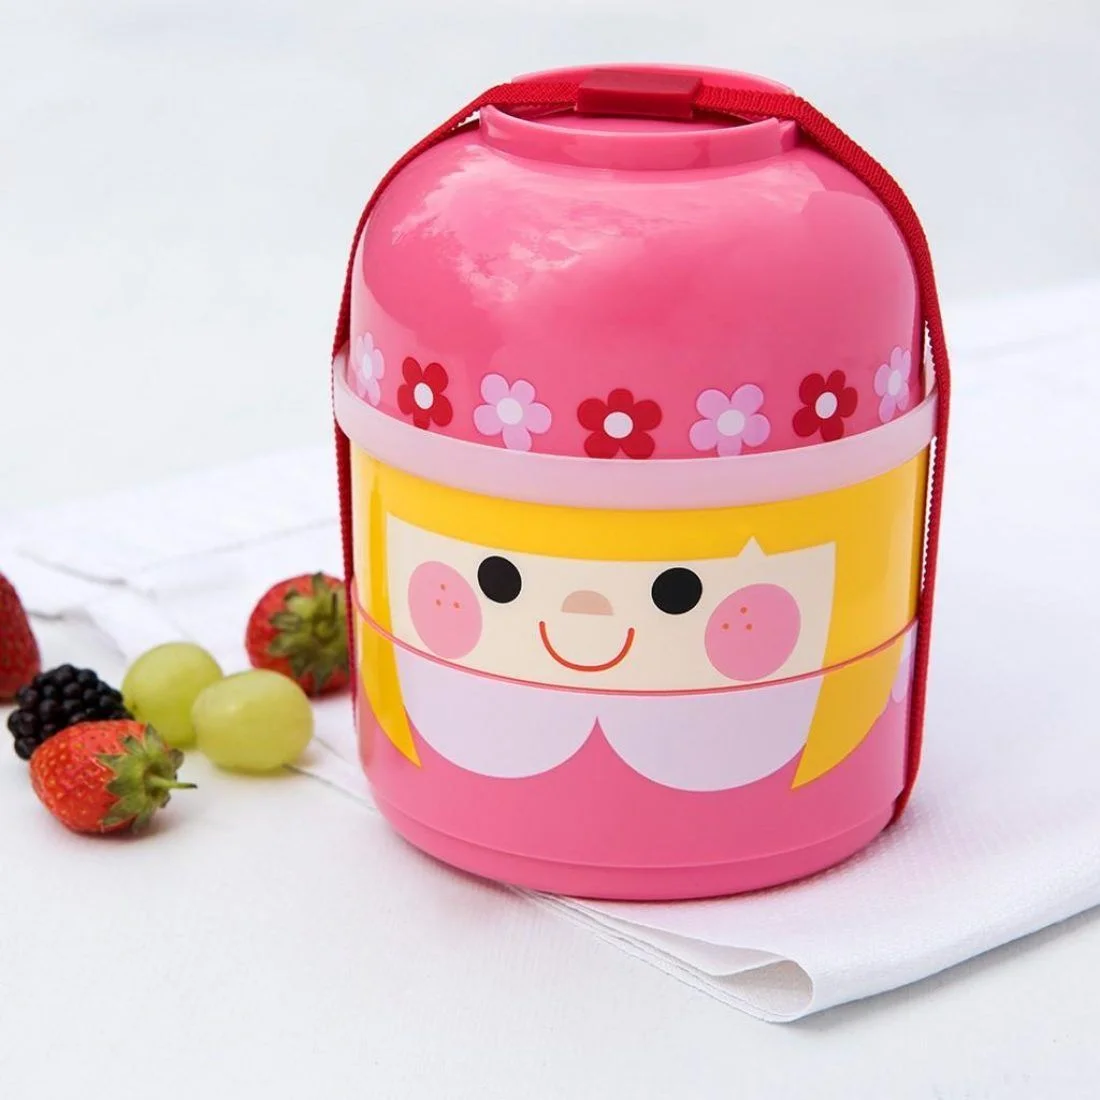 

Plastic 3 layer anime Doll Bento Box Food Container The Bento Box doll lunch box, Any color